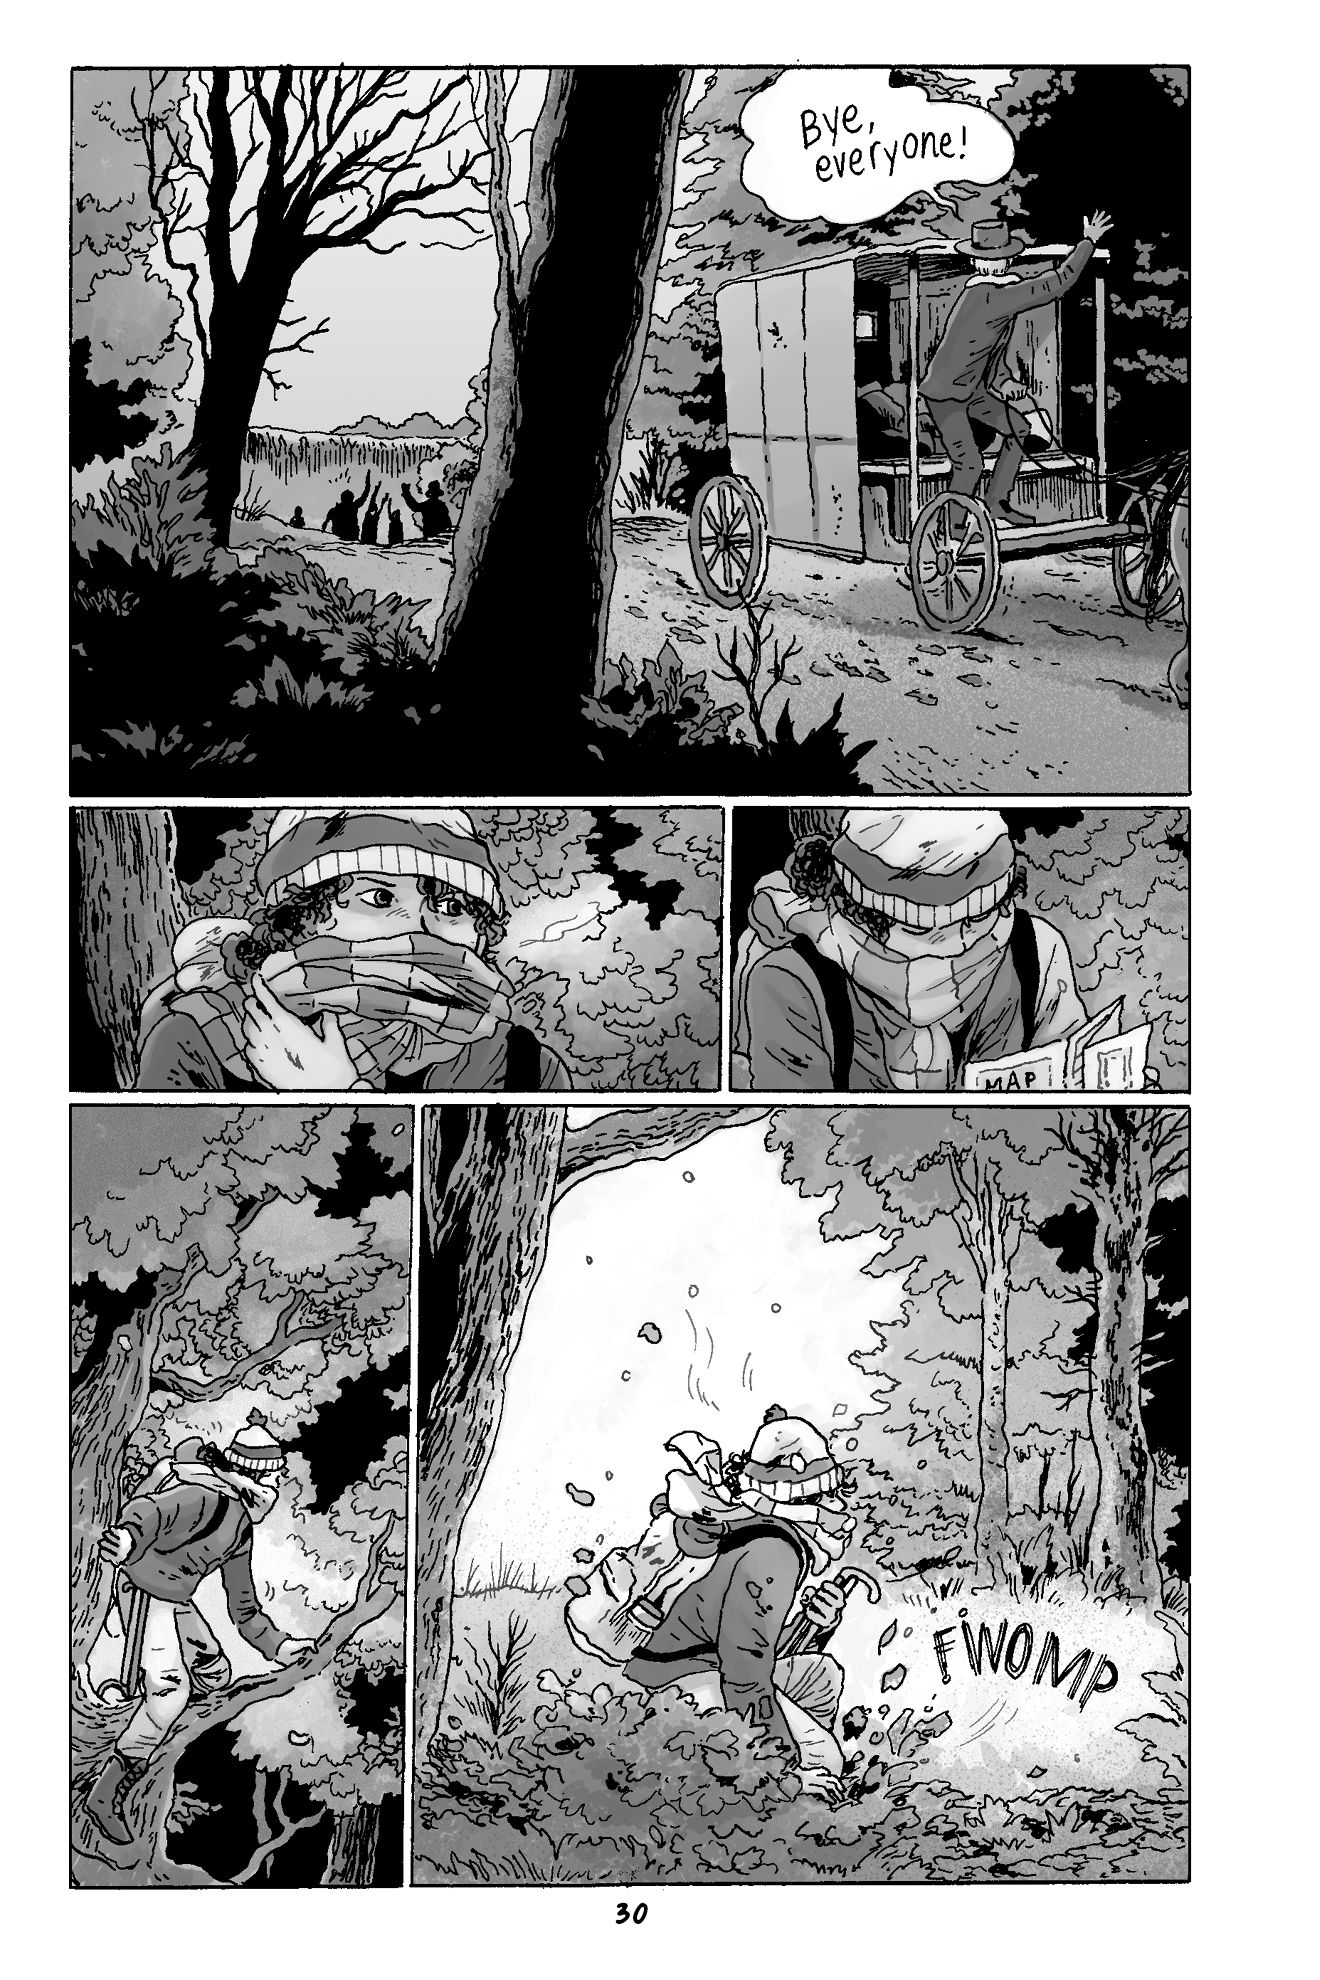 A page from The Walking Dead: Clementine: Book One, by Tillie Walden.